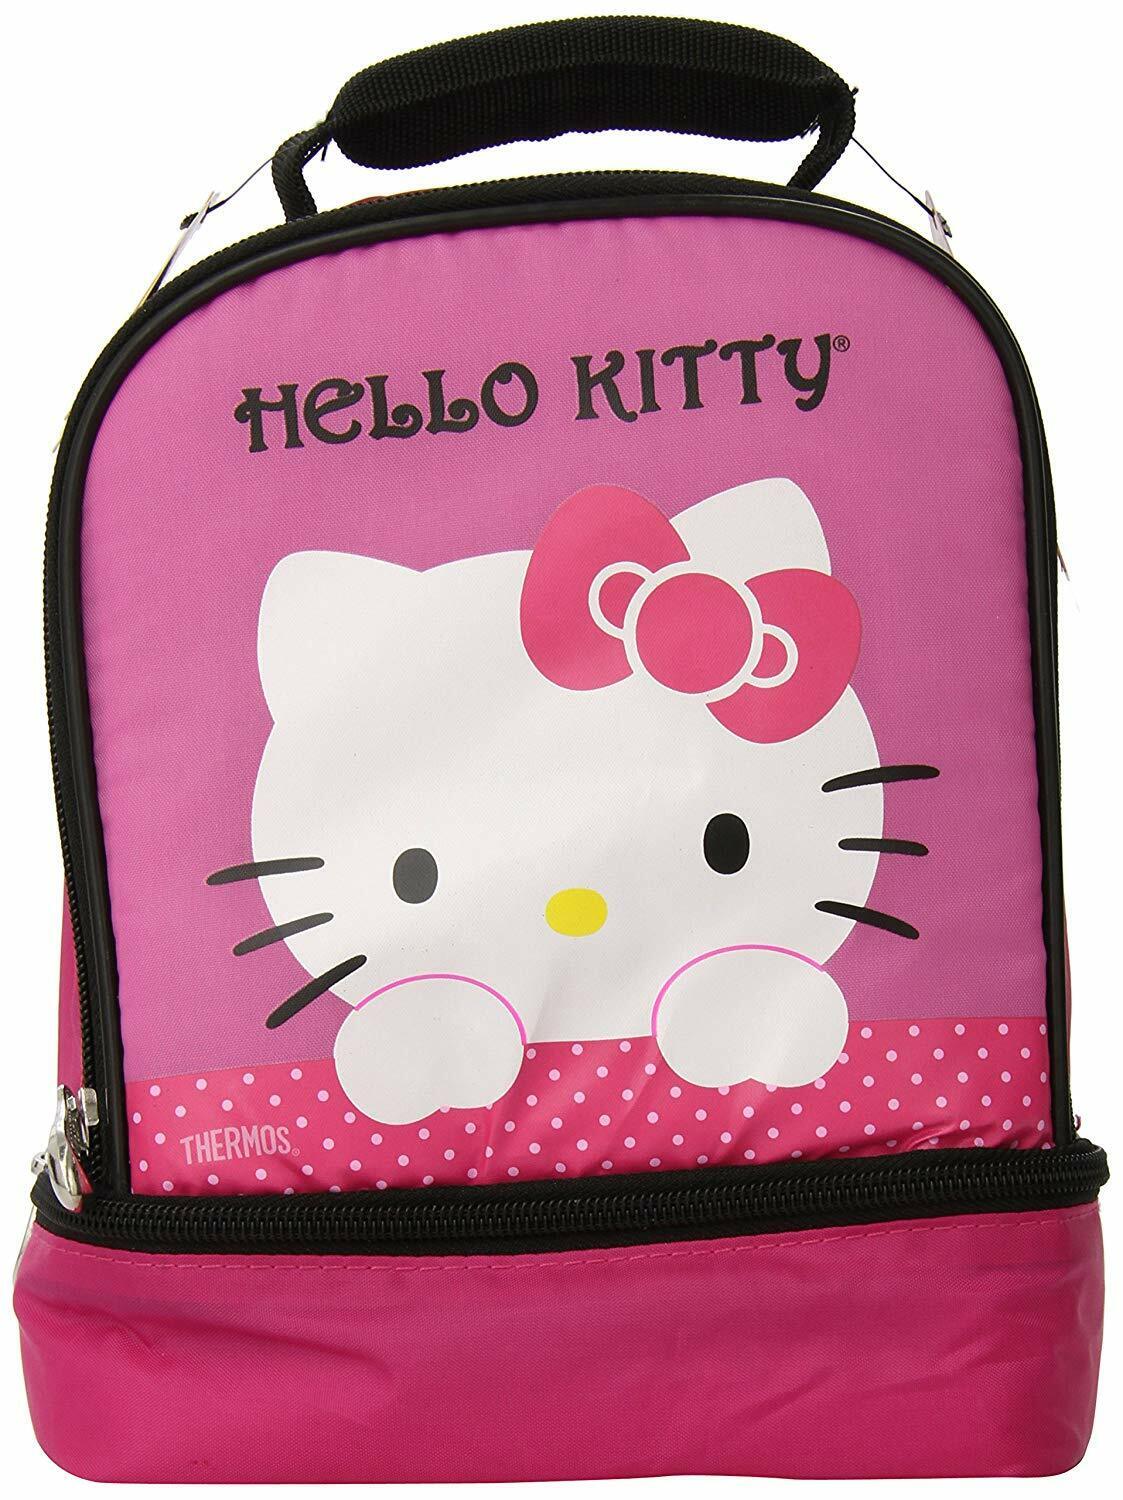 Thermos Hello Kitty Lunch Bag, Insulated Lunch Bags For Kids, Lunch Box For Kids, Food Drink Dual Compartment Lunch Kit - image 1 of 2